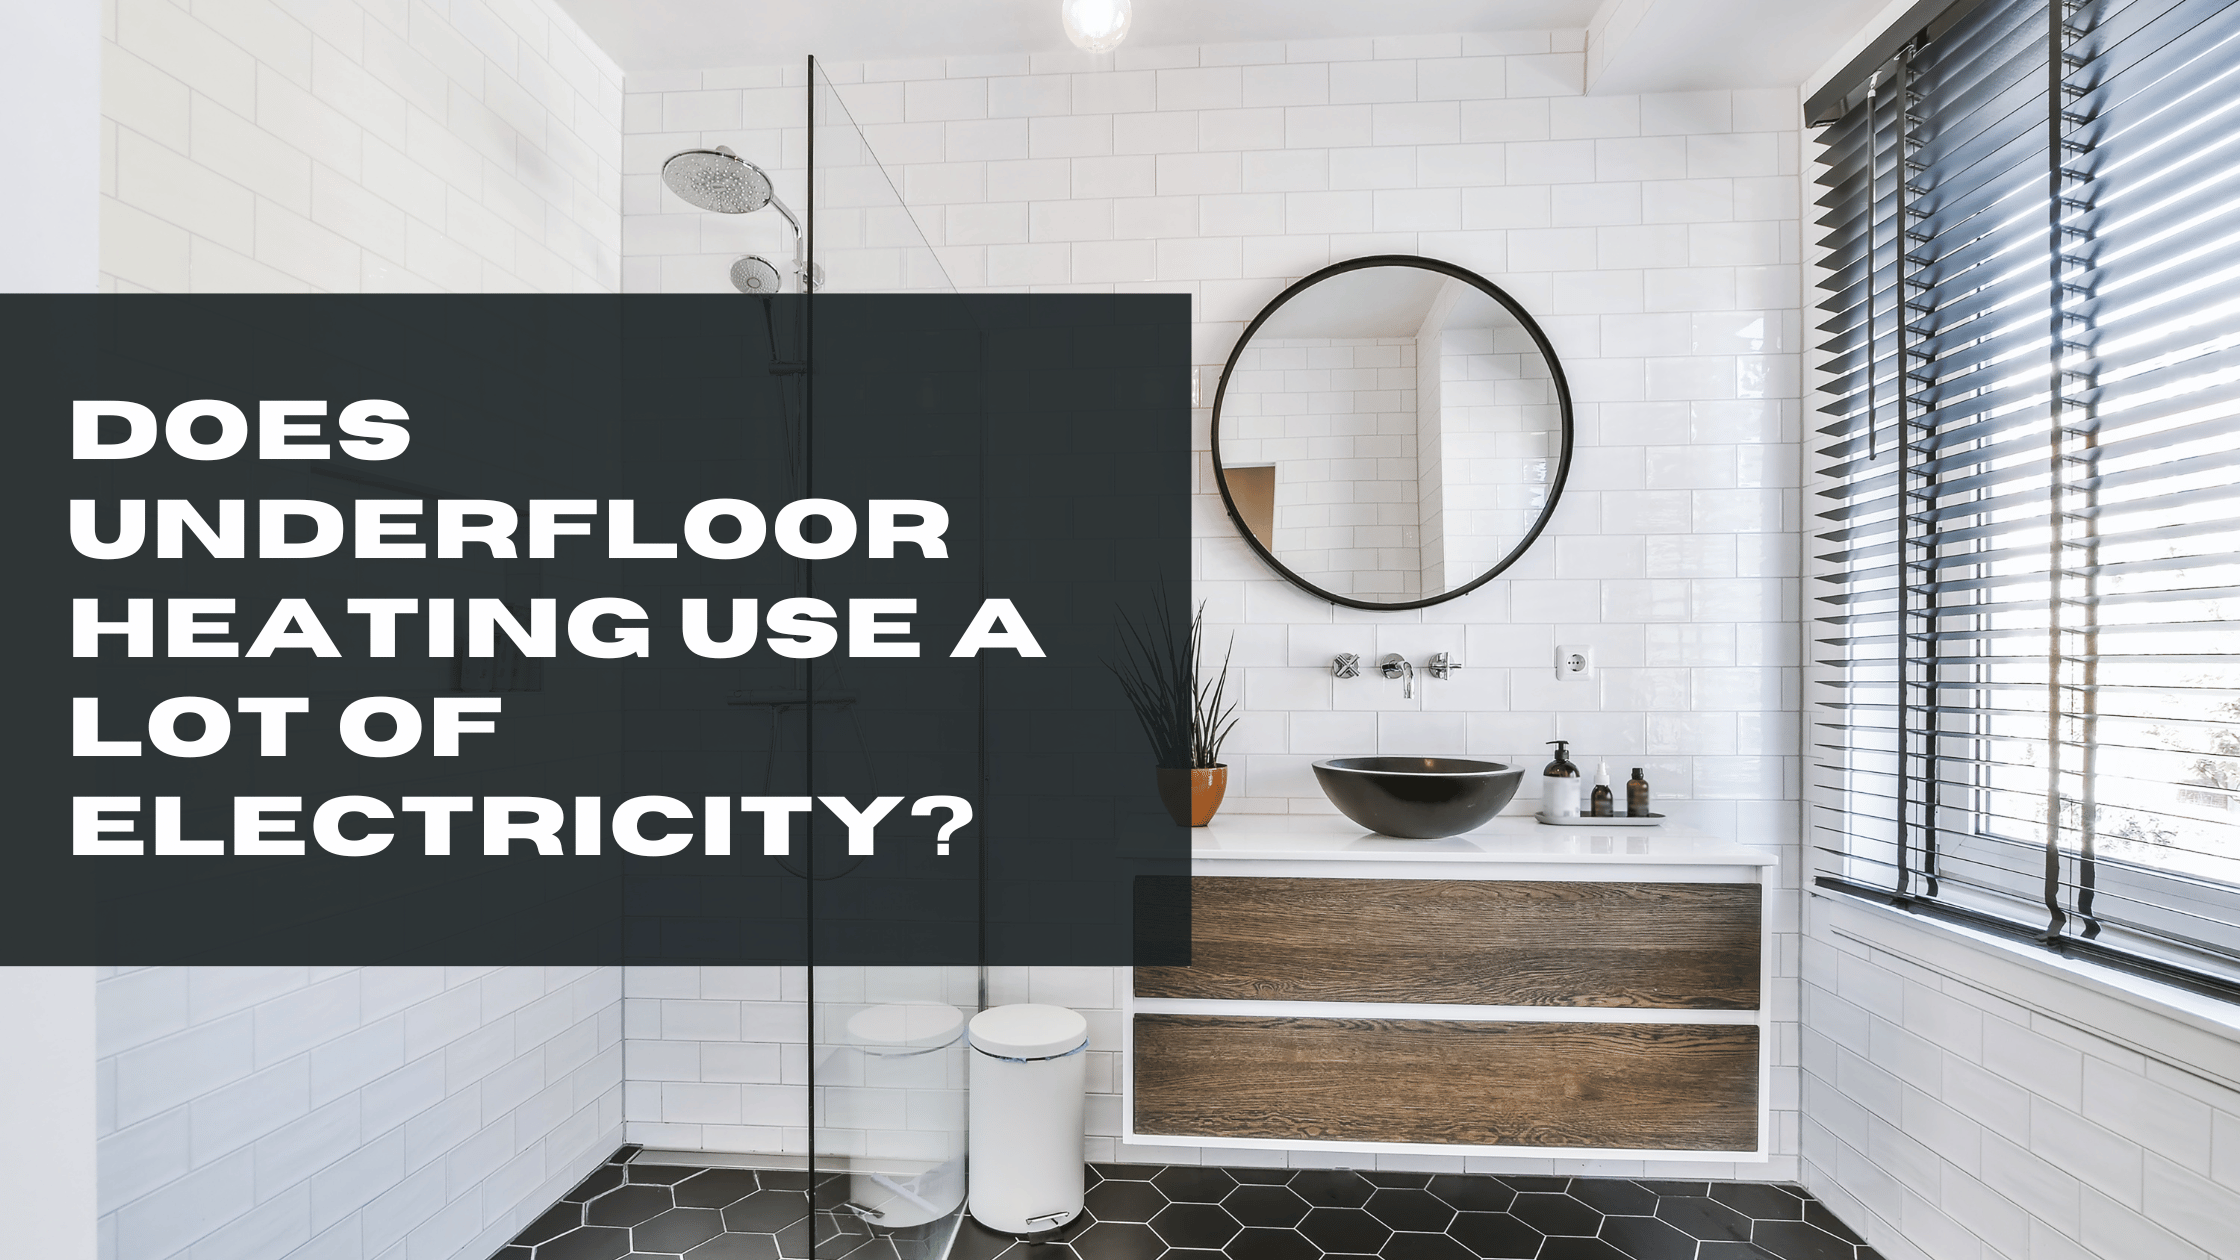 Does Underfloor Heating Use a Lot of Electricity?